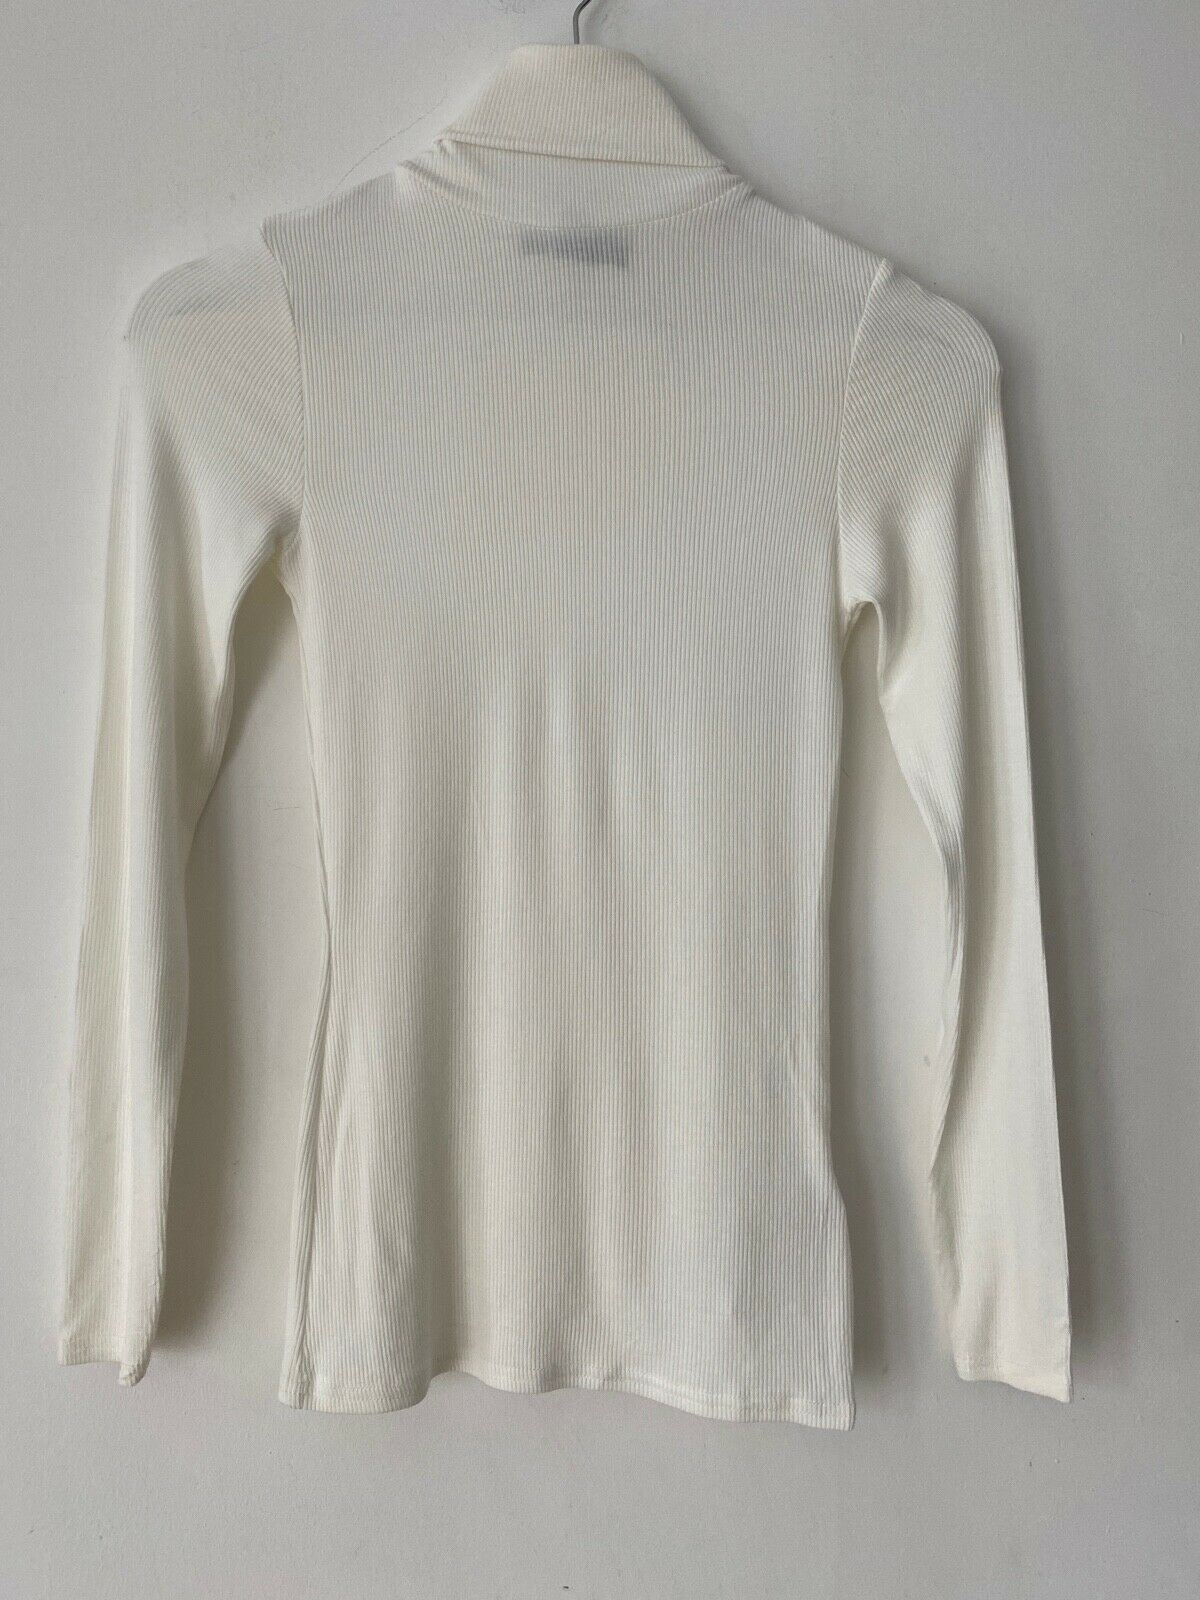 New Look Ribbed Long Sleeve Roll Neck Cream 6, 8, 10, 12, 14, 18